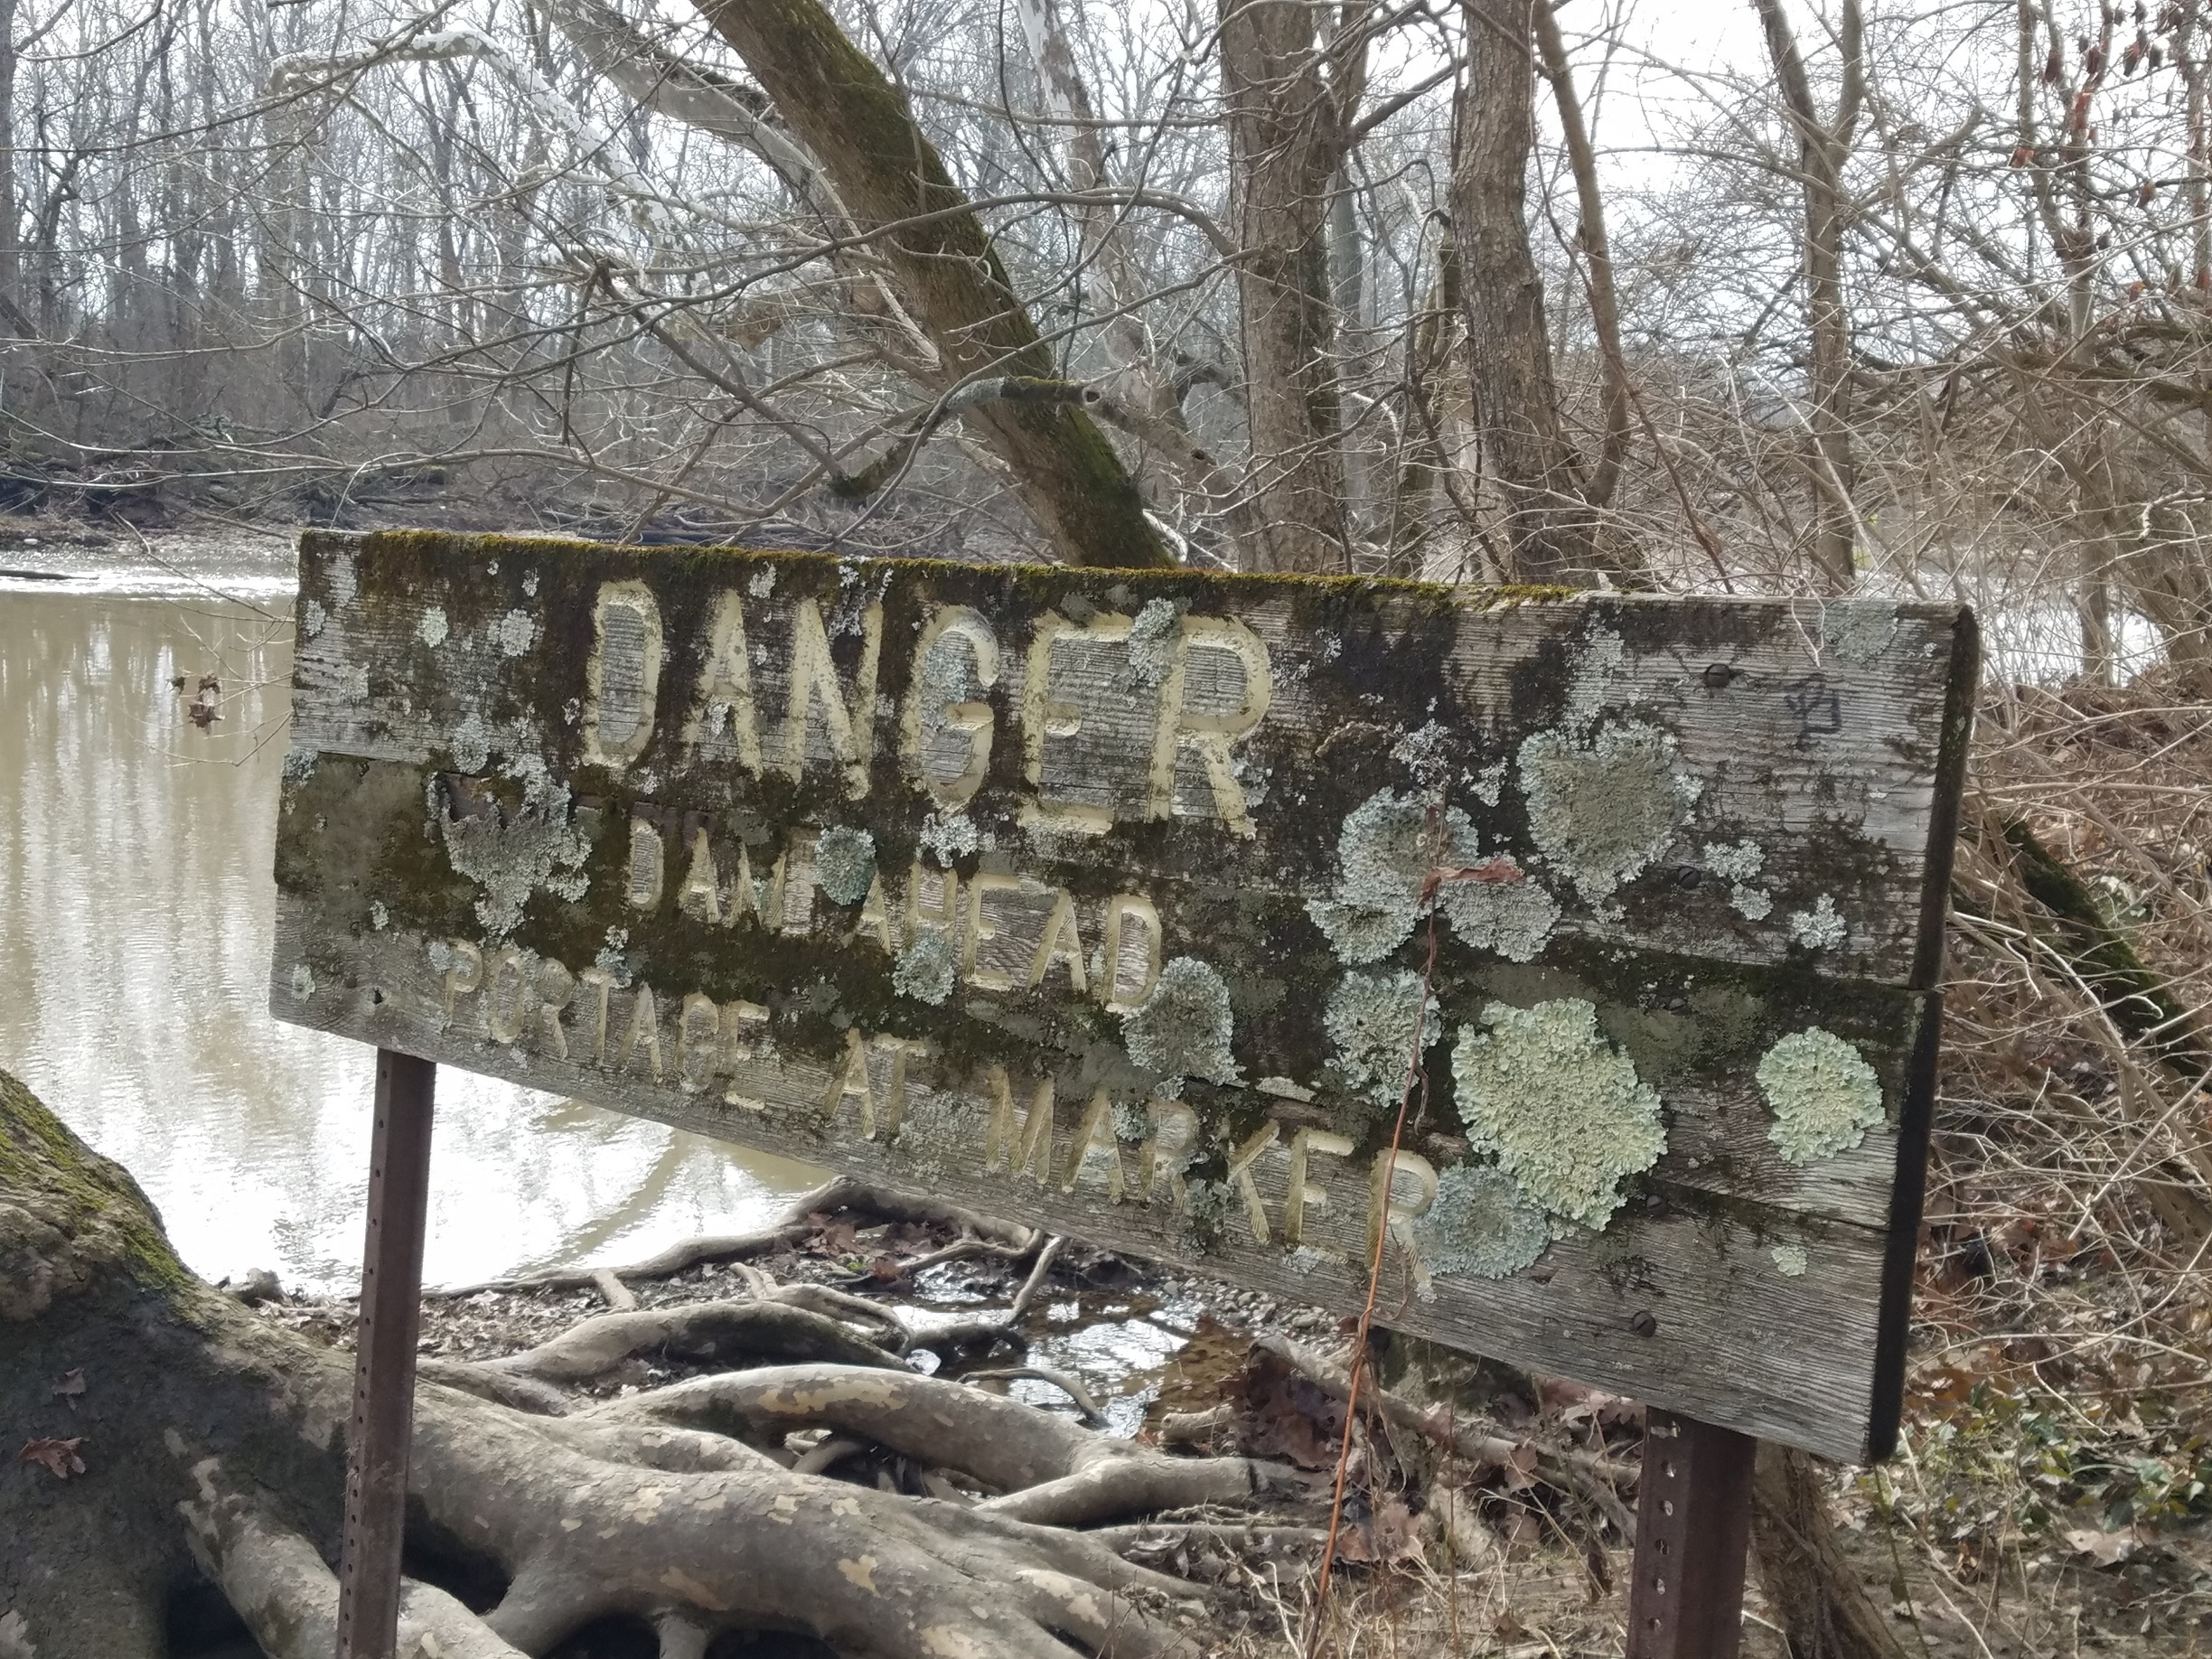 An old wooden sign warning about the lowhead dam just down stream. There are newer looking metal signs. The lichen encrusted sign reads "Danger, Dam Ahead. Portage at Marker". This can be found east of Antrim lake on the western shore of the river, along the trails that snake through the wooded area of the park. #urbanjungle
